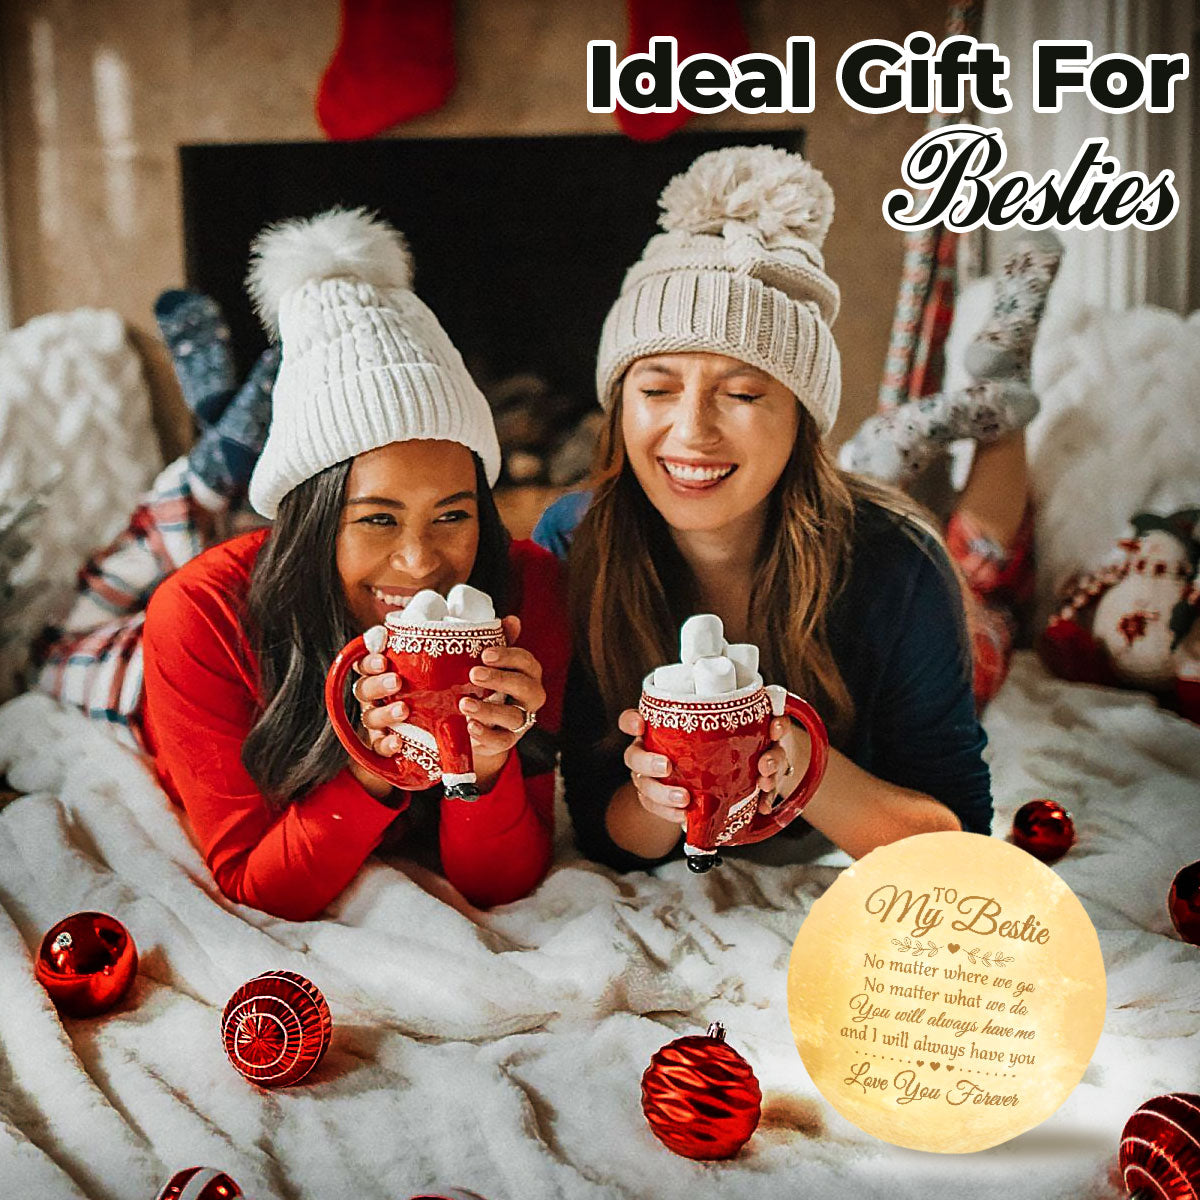 Sisters Are We And Forever We Will Be - Christmas Gift For Sisters